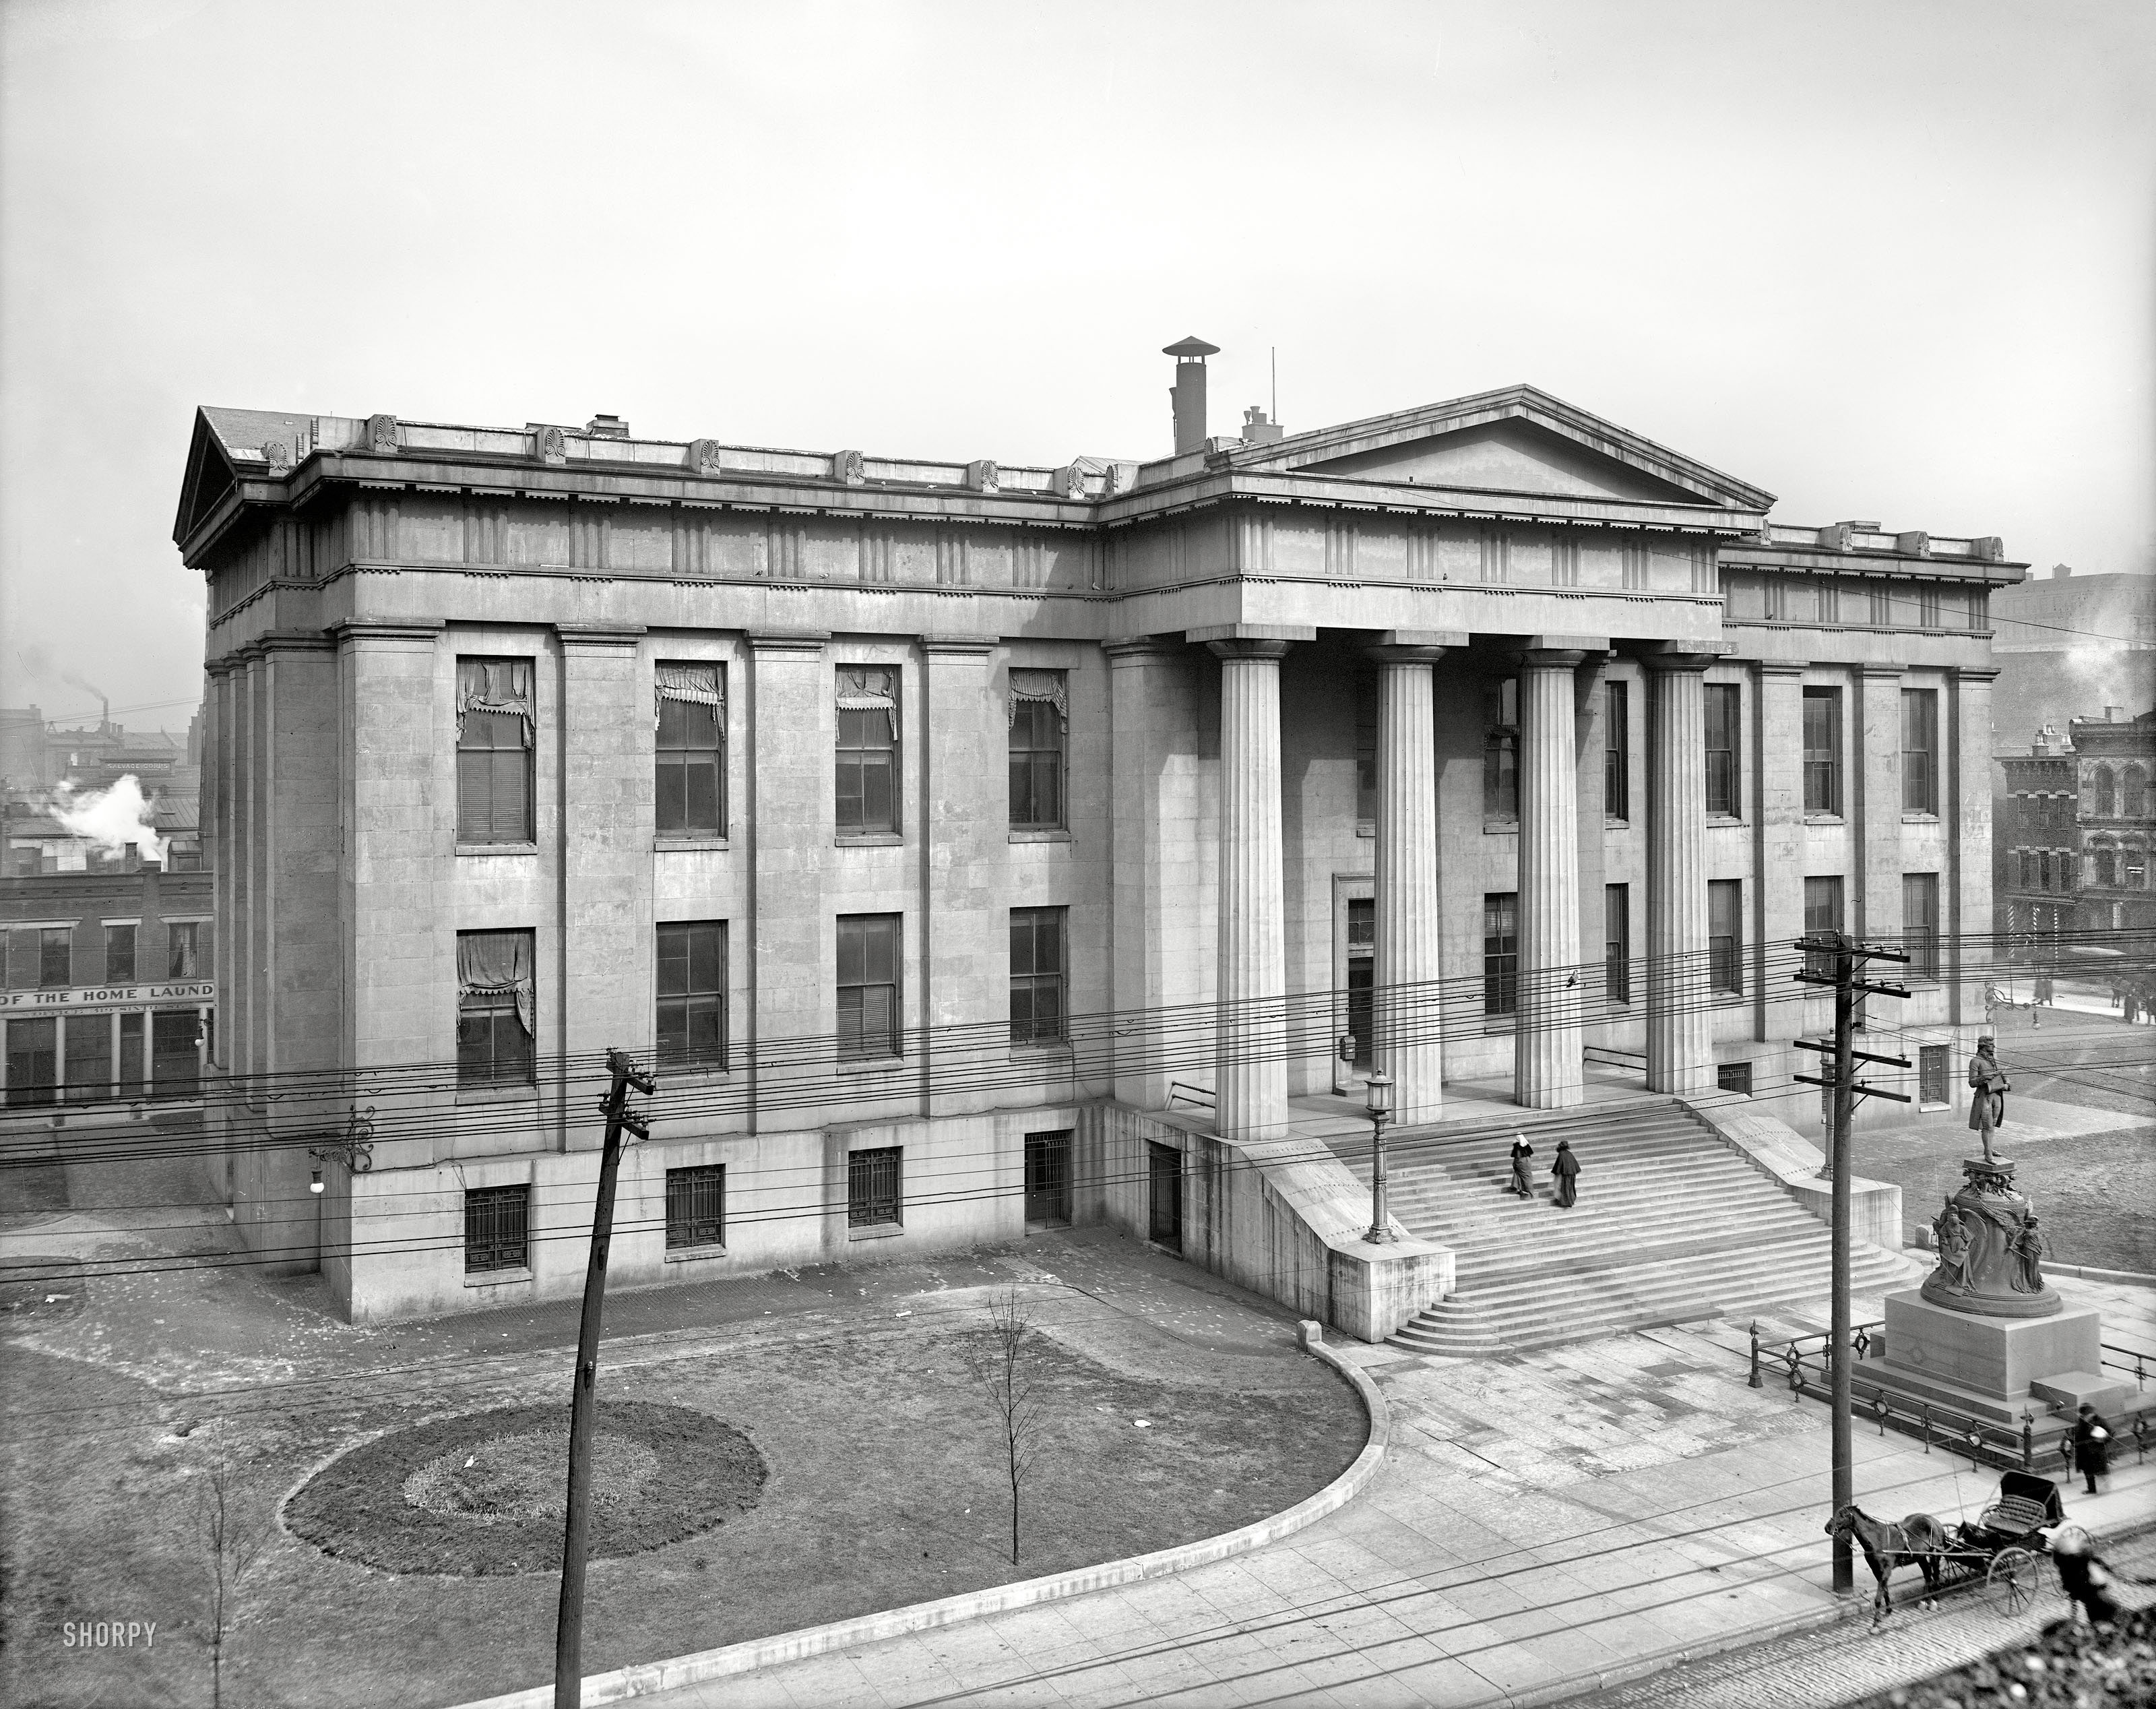 Circa 1906, continuing our tour of the Derby City. "Courthouse and Thomas Jefferson statue, Louisville, Kentucky." The building, which took over 20 years to complete, was called an "elephantine monstrosity" by one local newspaper. Elephantine or not, the pigeons like it. 8x10 glass negative. View full size.